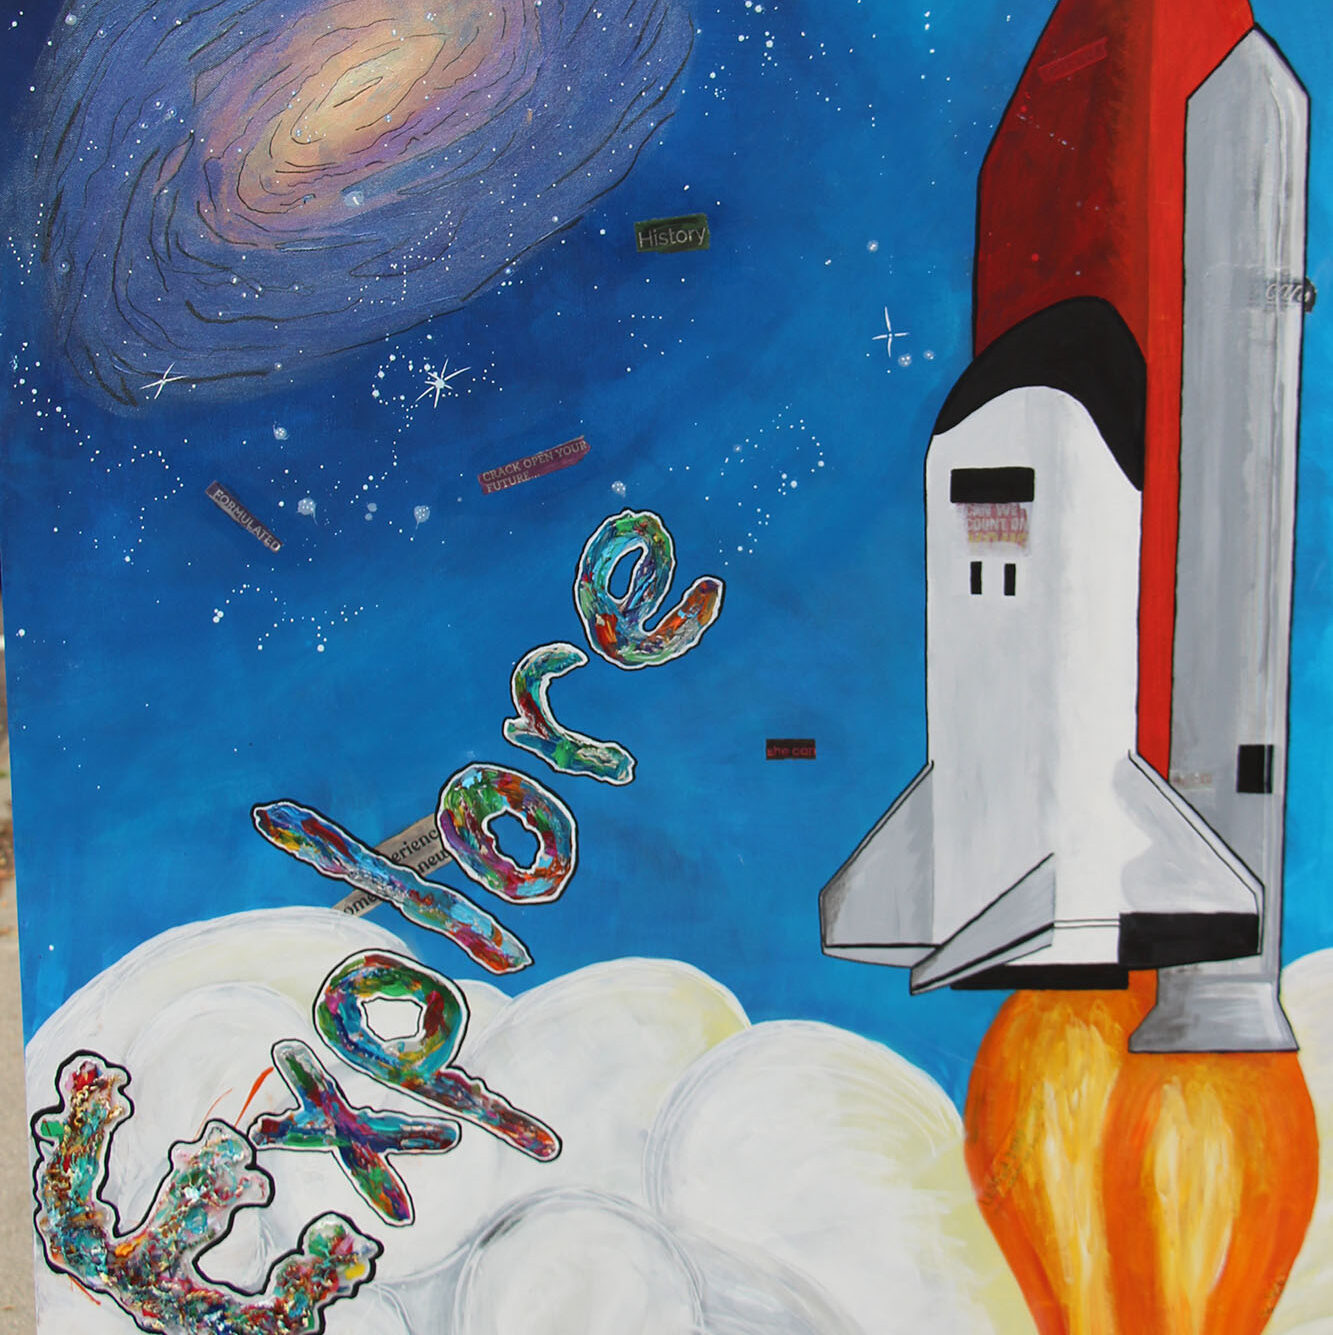 Artwork created by a former program participant in CRCF. Depicts spaceship shooting off into space and the word ‘Explore’.